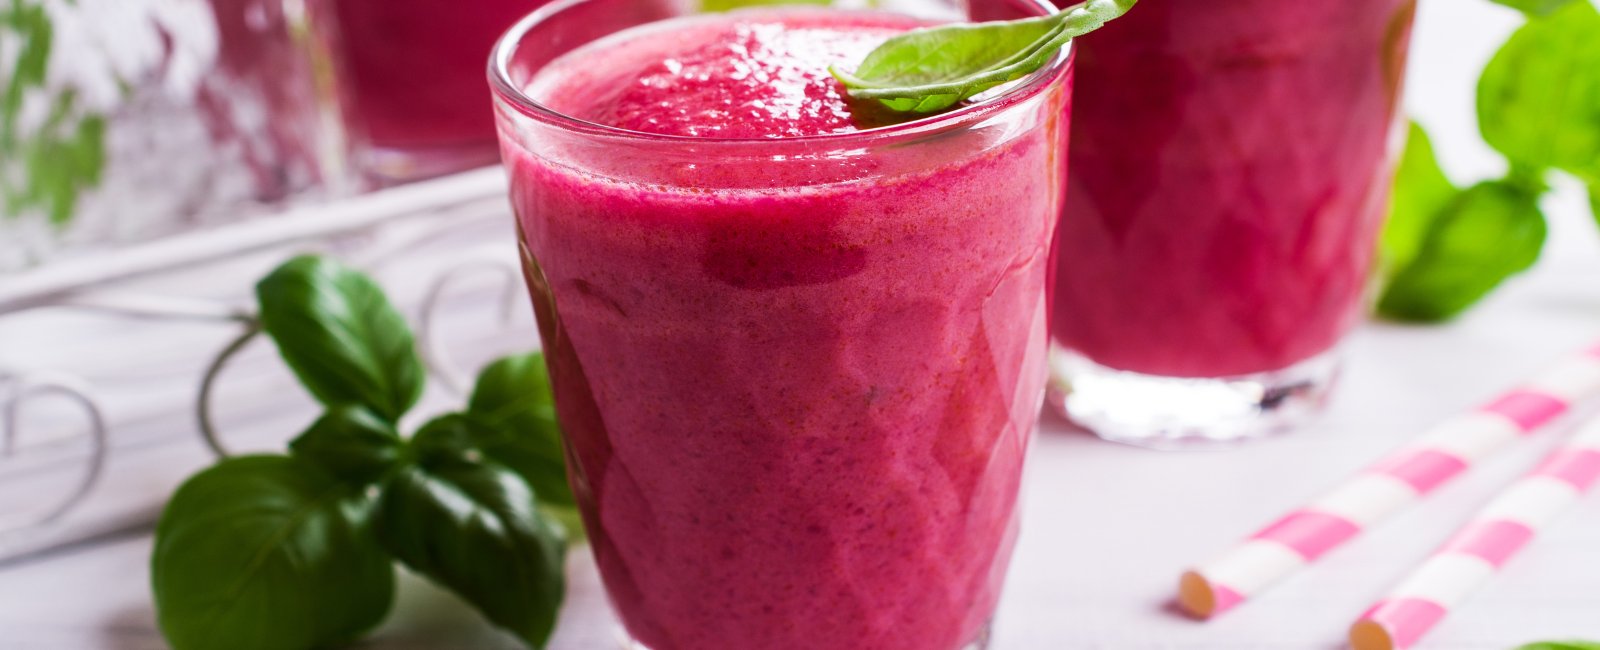 BEETROOT AND STRAWBERRY SMOOTHIE